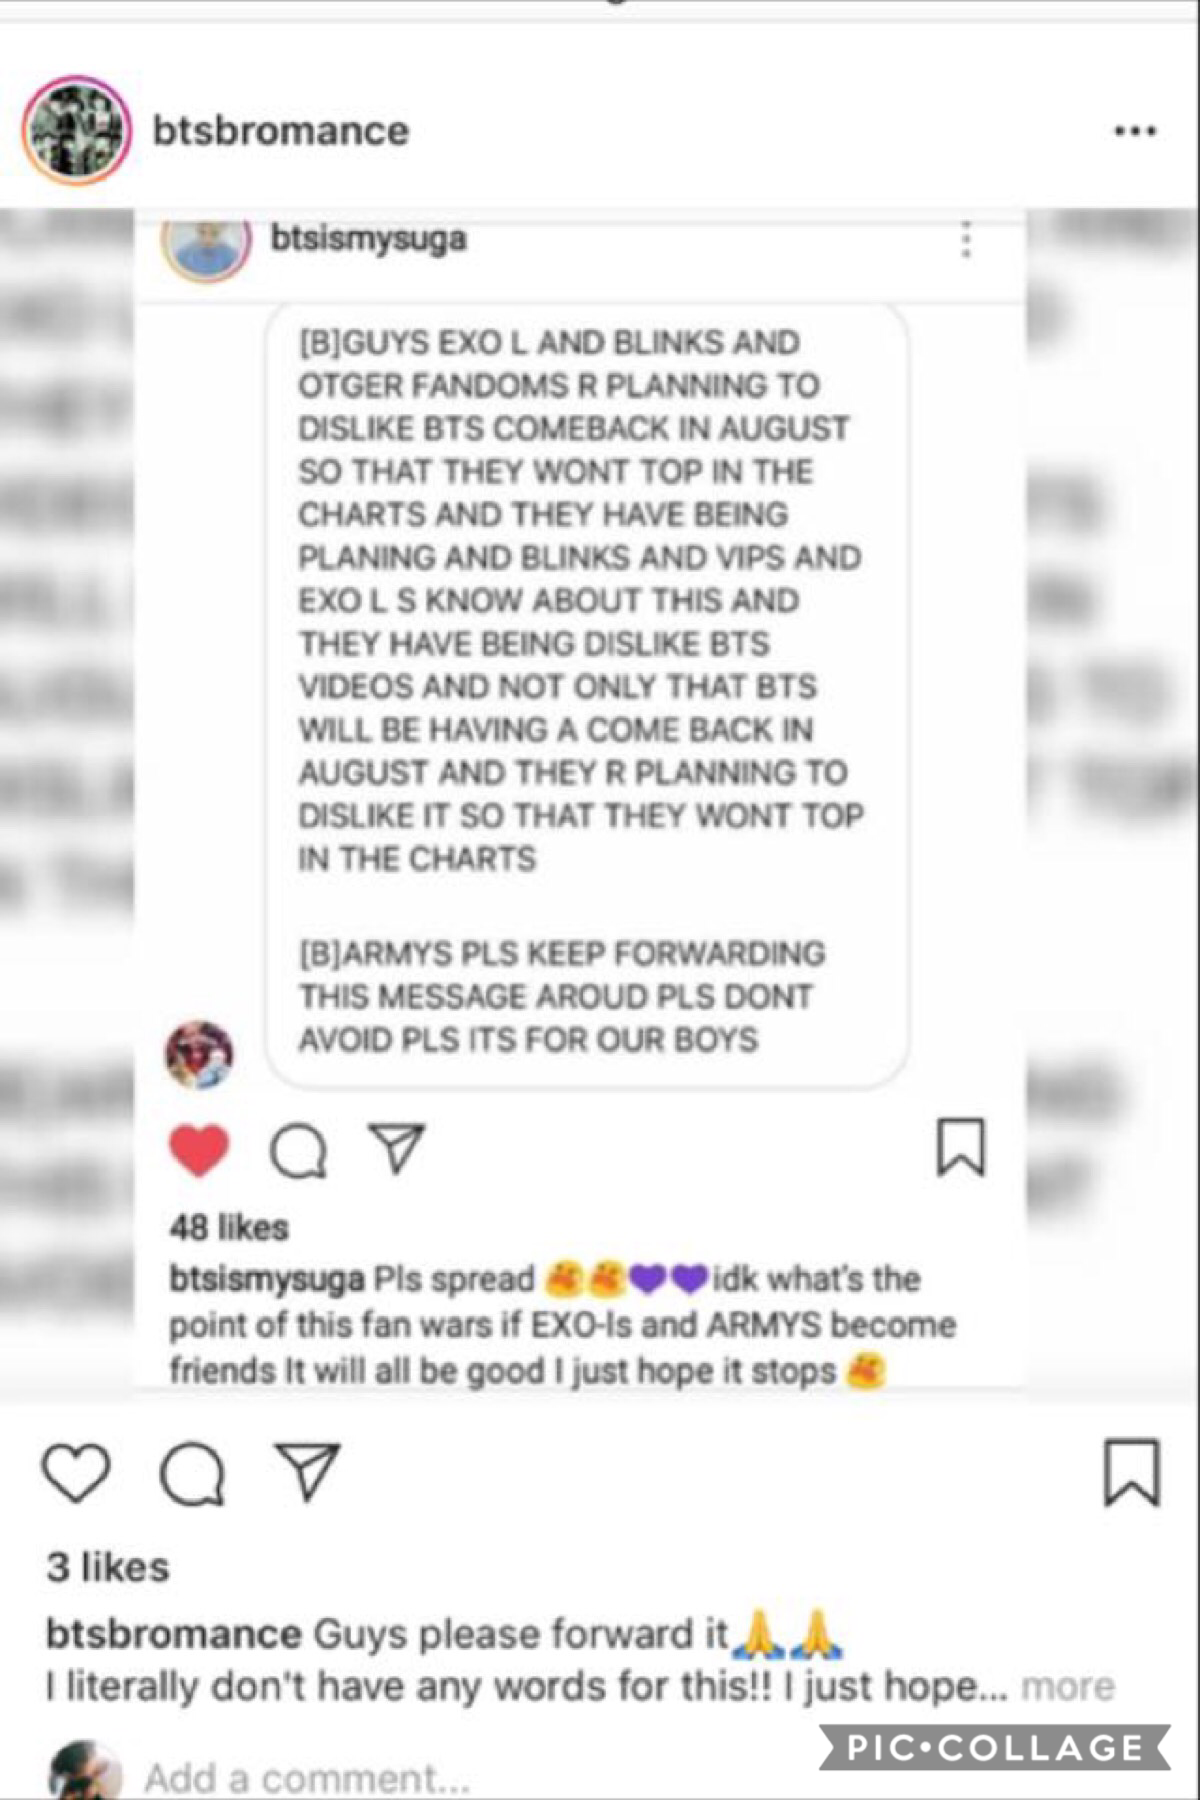 hi everyone!! 🍵click🍵
i know i don’t usually post stuff like this! very sorry. but i just needed to get this message around for the sake of bts ❤️❤️ please repost 🌺